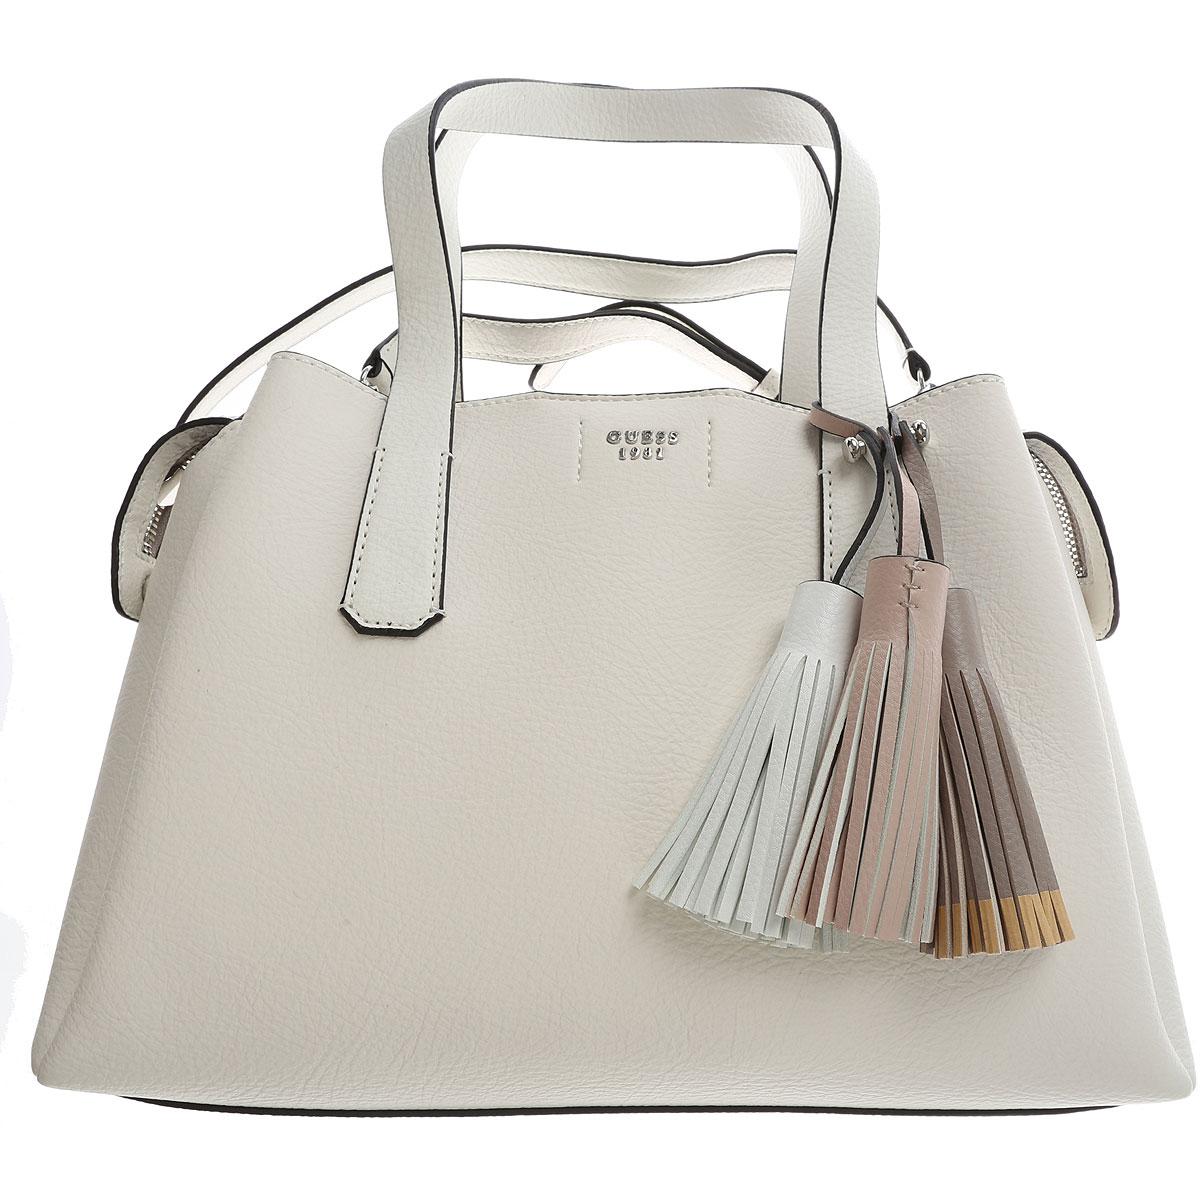 Guess Tote Bag On Sale in White - Lyst